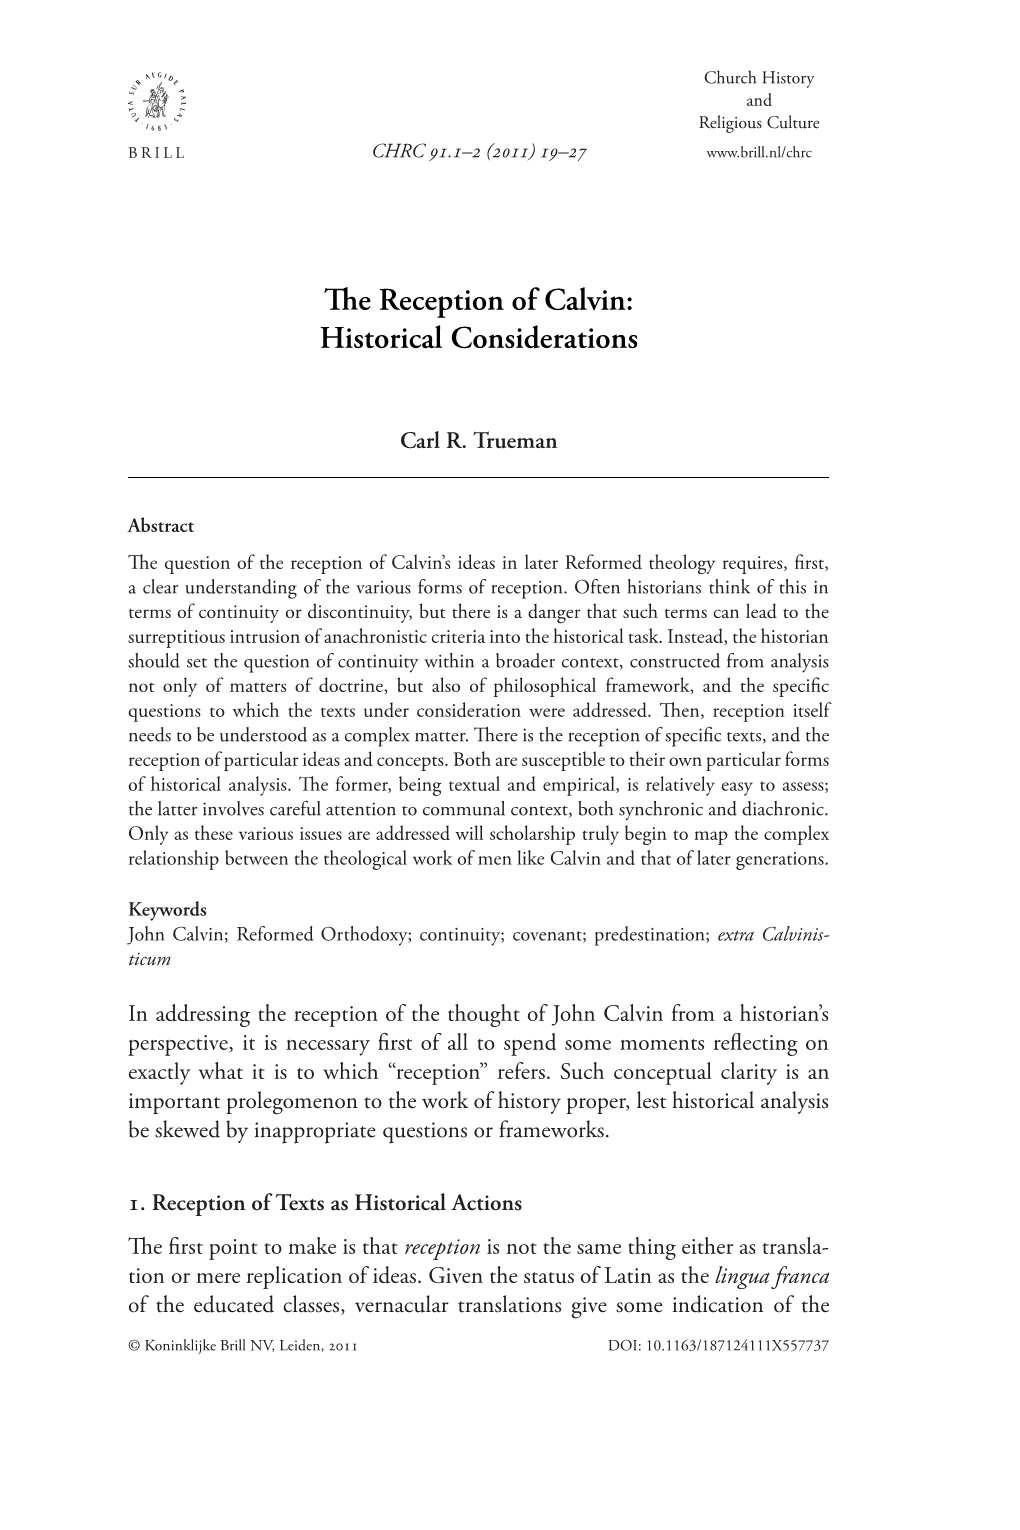 The Reception of Calvin: Historical Considerations